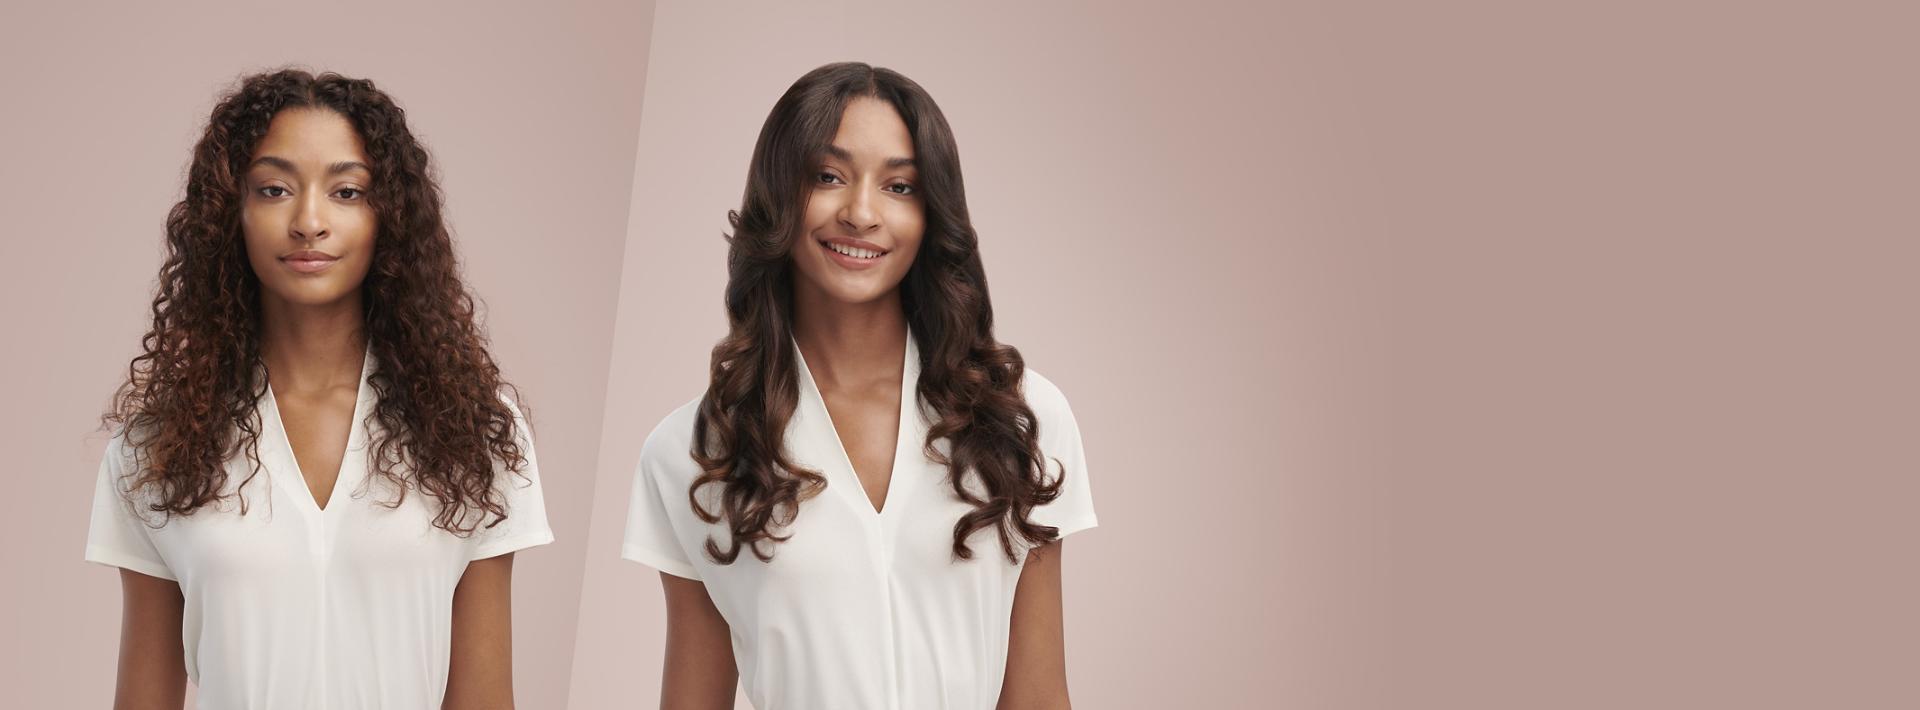 Model with type 1 hair demonstrating her hair before and after being styled with the Dyson Airwrap multi-styler.